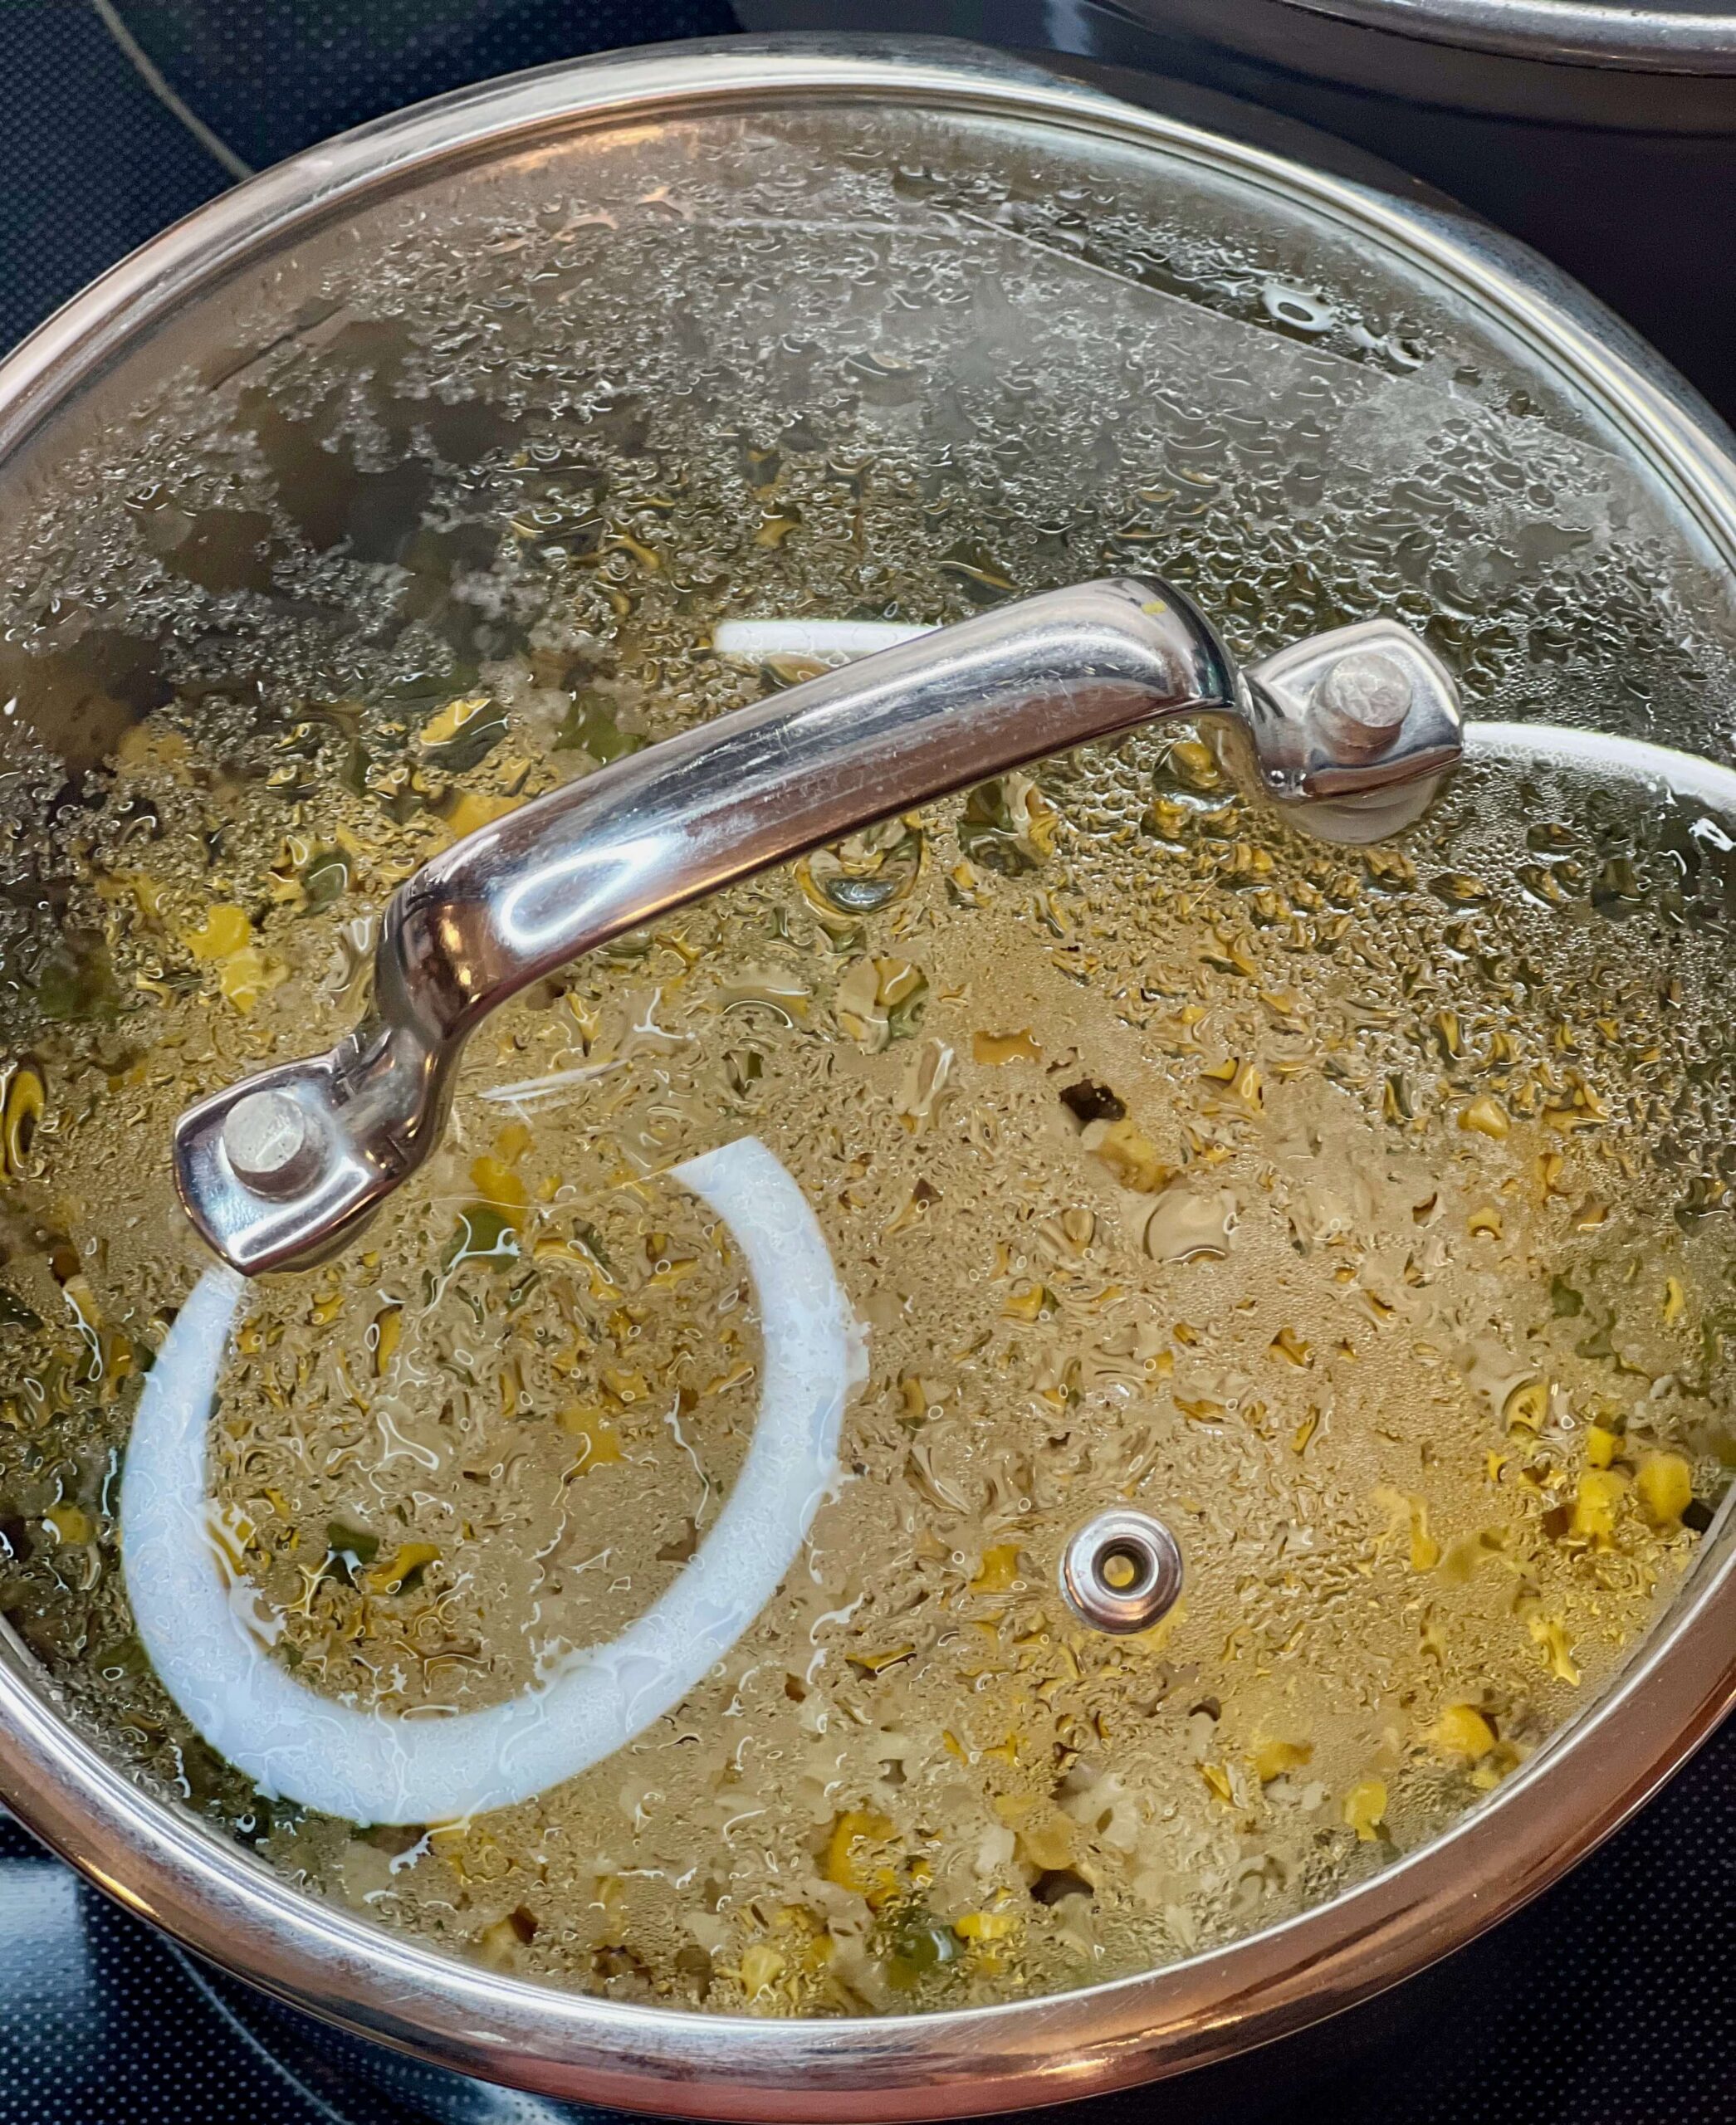 Do not lift lid or stir while simmering